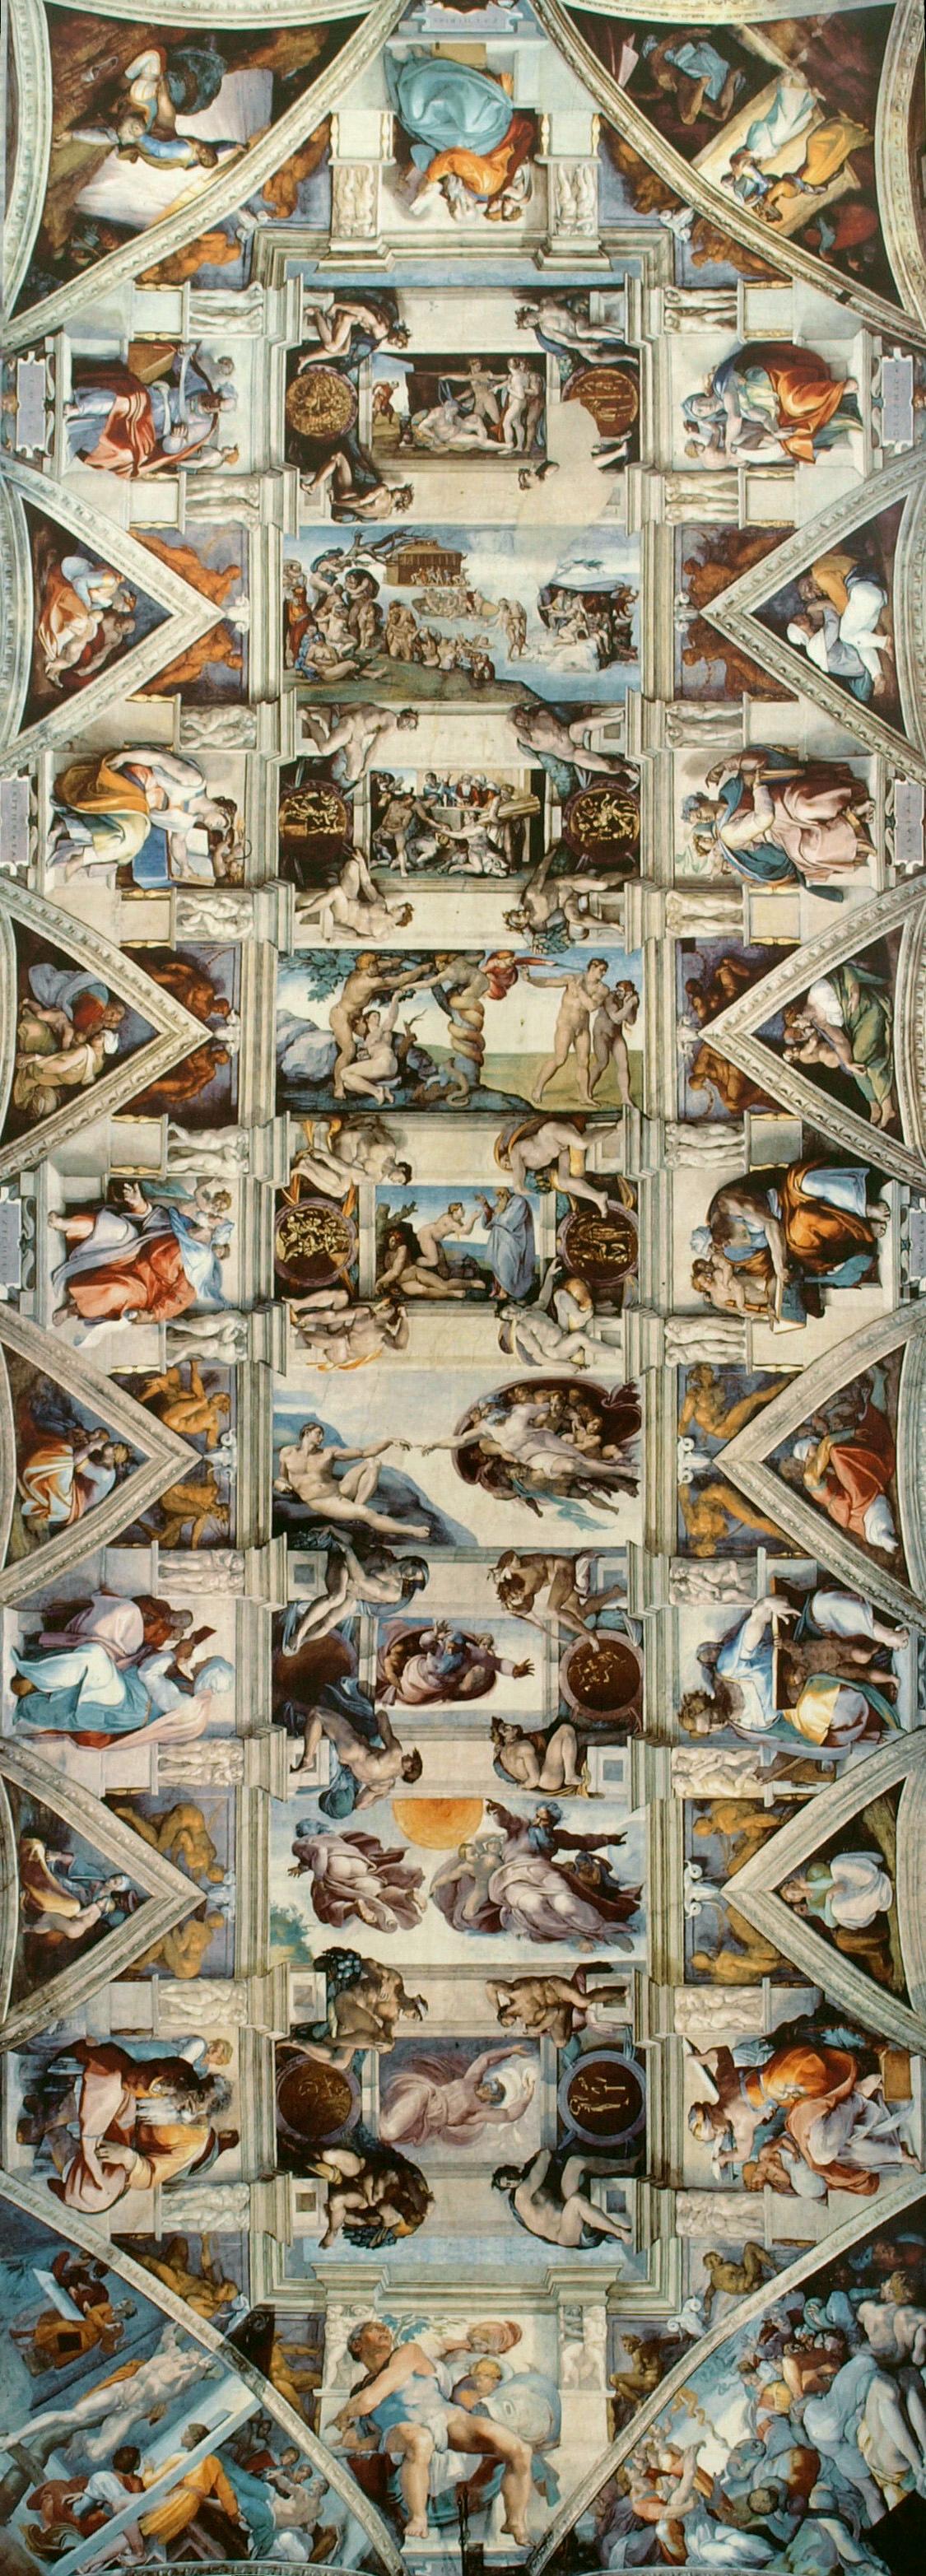 Finding Wisdom in the Past: Michelangelo’s Sistine Ceiling